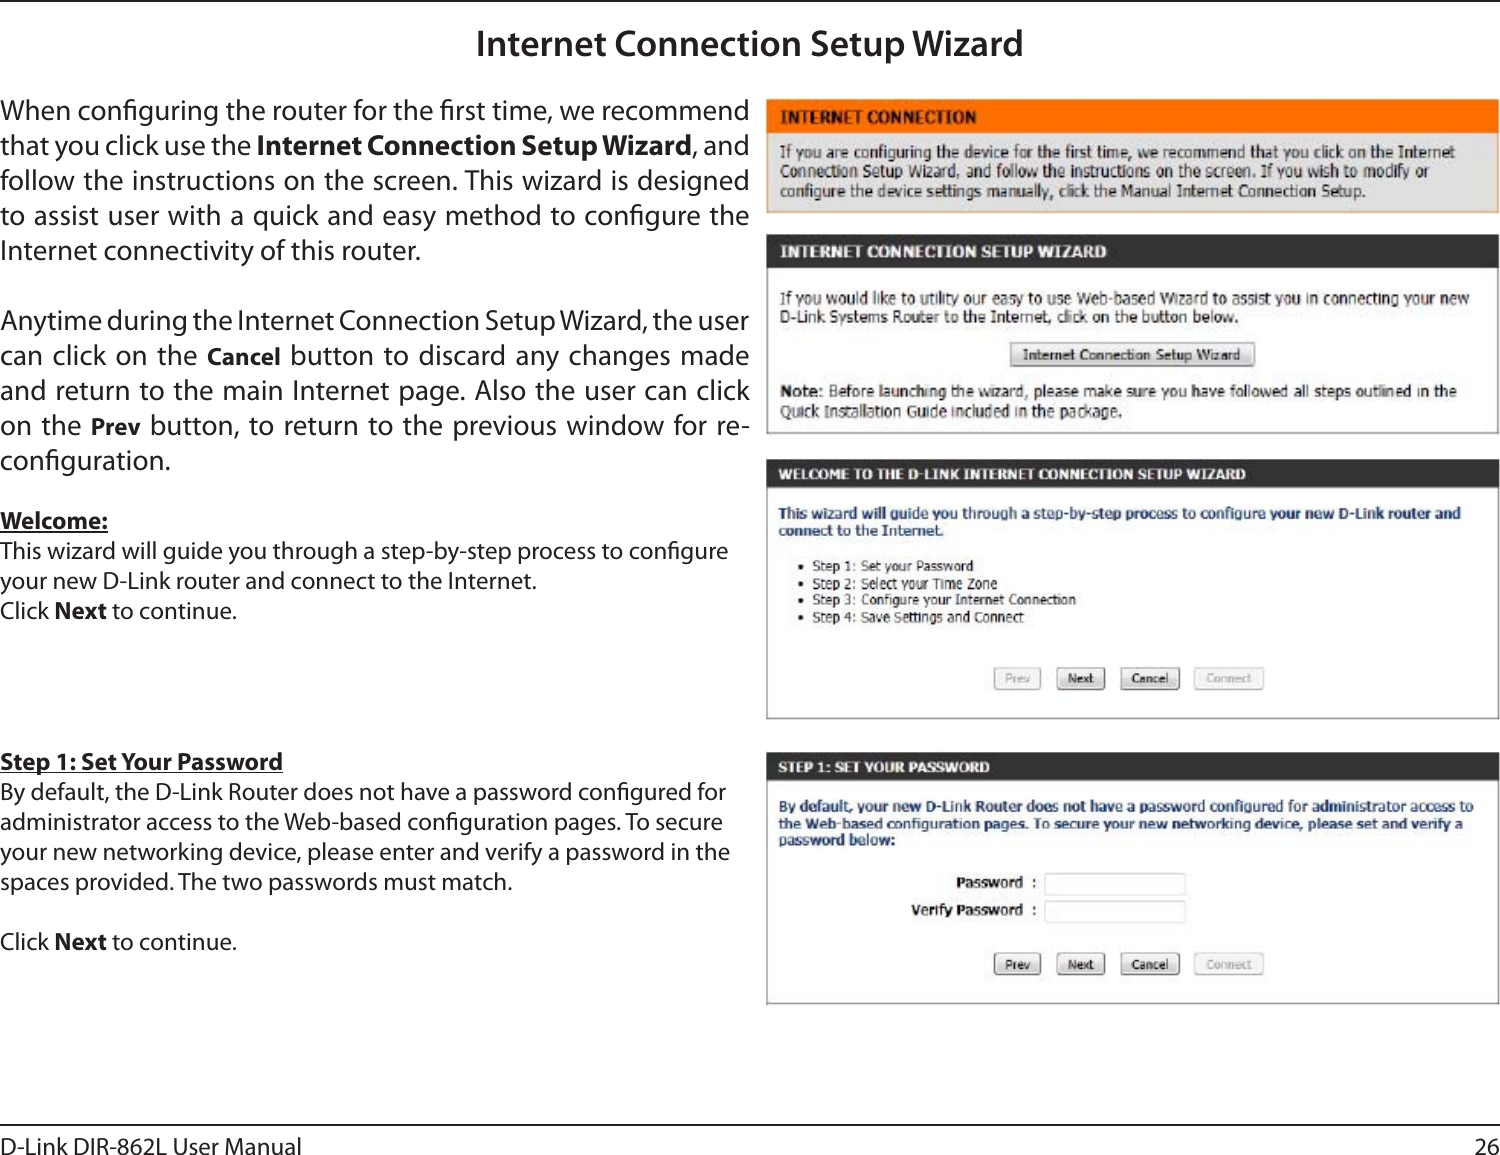 26D-Link DIR-862L User ManualInternet Connection Setup WizardWhen conguring the router for the rst time, we recommend that you click use the Internet Connection Setup Wizard, and follow the instructions on the screen. This wizard is designed to assist user with a quick and easy method to congure the Internet connectivity of this router.Anytime during the Internet Connection Setup Wizard, the user can click on the Cancel button to discard any changes made and return to the main Internet page. Also the user can click on the Prev button, to return to the previous window for re-conguration.Welcome:This wizard will guide you through a step-by-step process to congure your new D-Link router and connect to the Internet. Click Next to continue.Step 1: Set Your PasswordBy default, the D-Link Router does not have a password congured for administrator access to the Web-based conguration pages. To secure your new networking device, please enter and verify a password in the spaces provided. The two passwords must match.Click Next to continue.